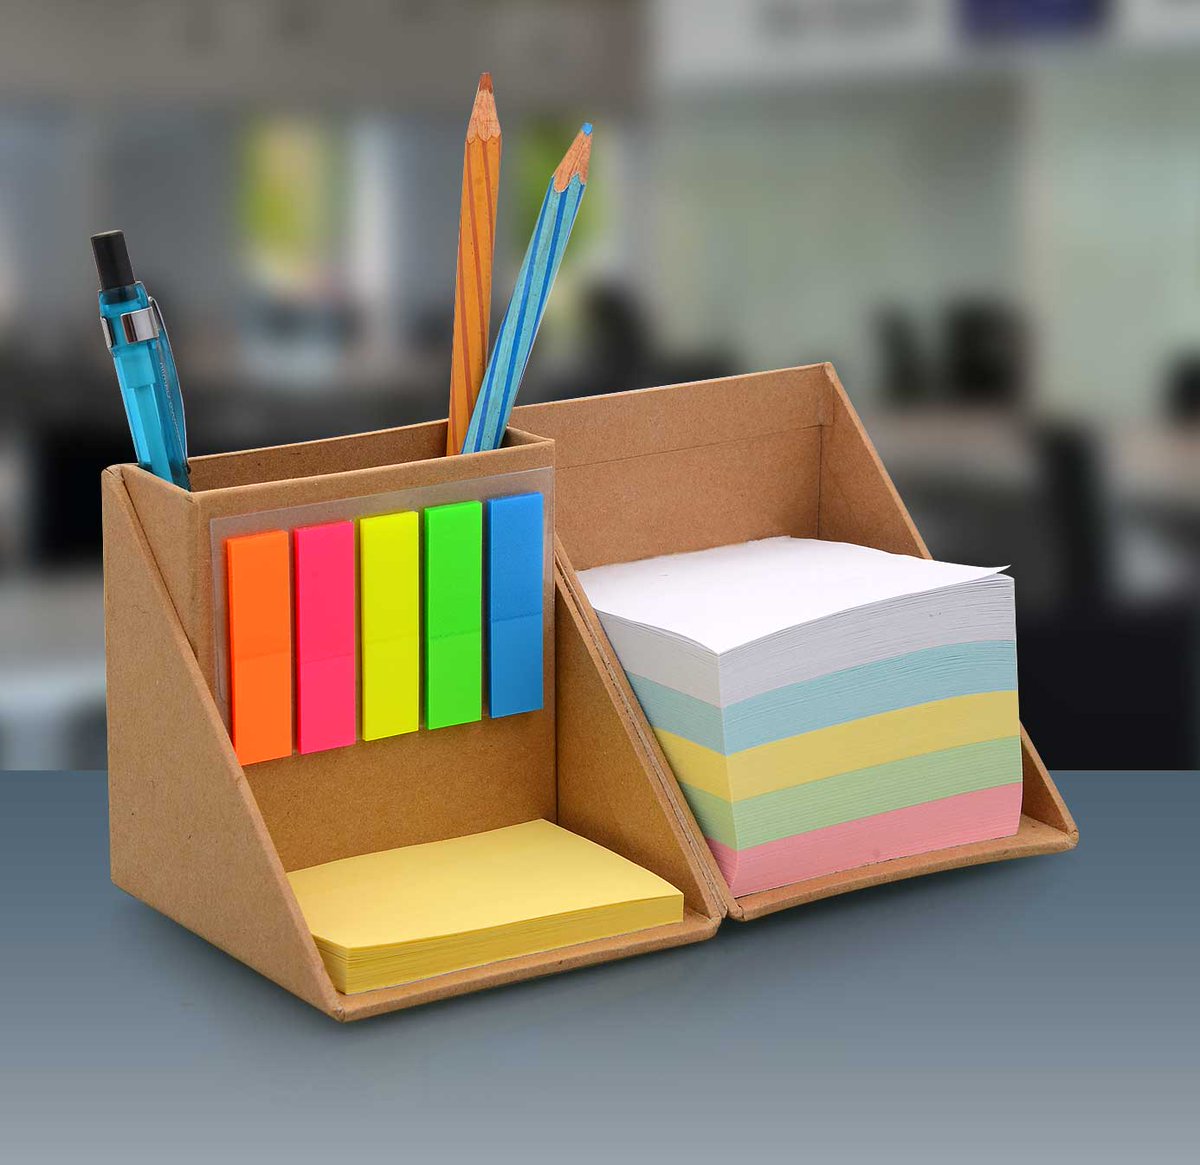 Cube pad box
.
.
.
.
#CorporateGifts
#CorporateEvents
#BrandedGifts
#CorporateSwag
#BusinessGifts
#EventPlanning
#EventMarketing
#CorporateMerchandise
#EmployeeGifts
#ClientGifts
#CorporateParties
#CorporateGifting
#TradeShows
#PromotionalProducts
#CompanyEvents